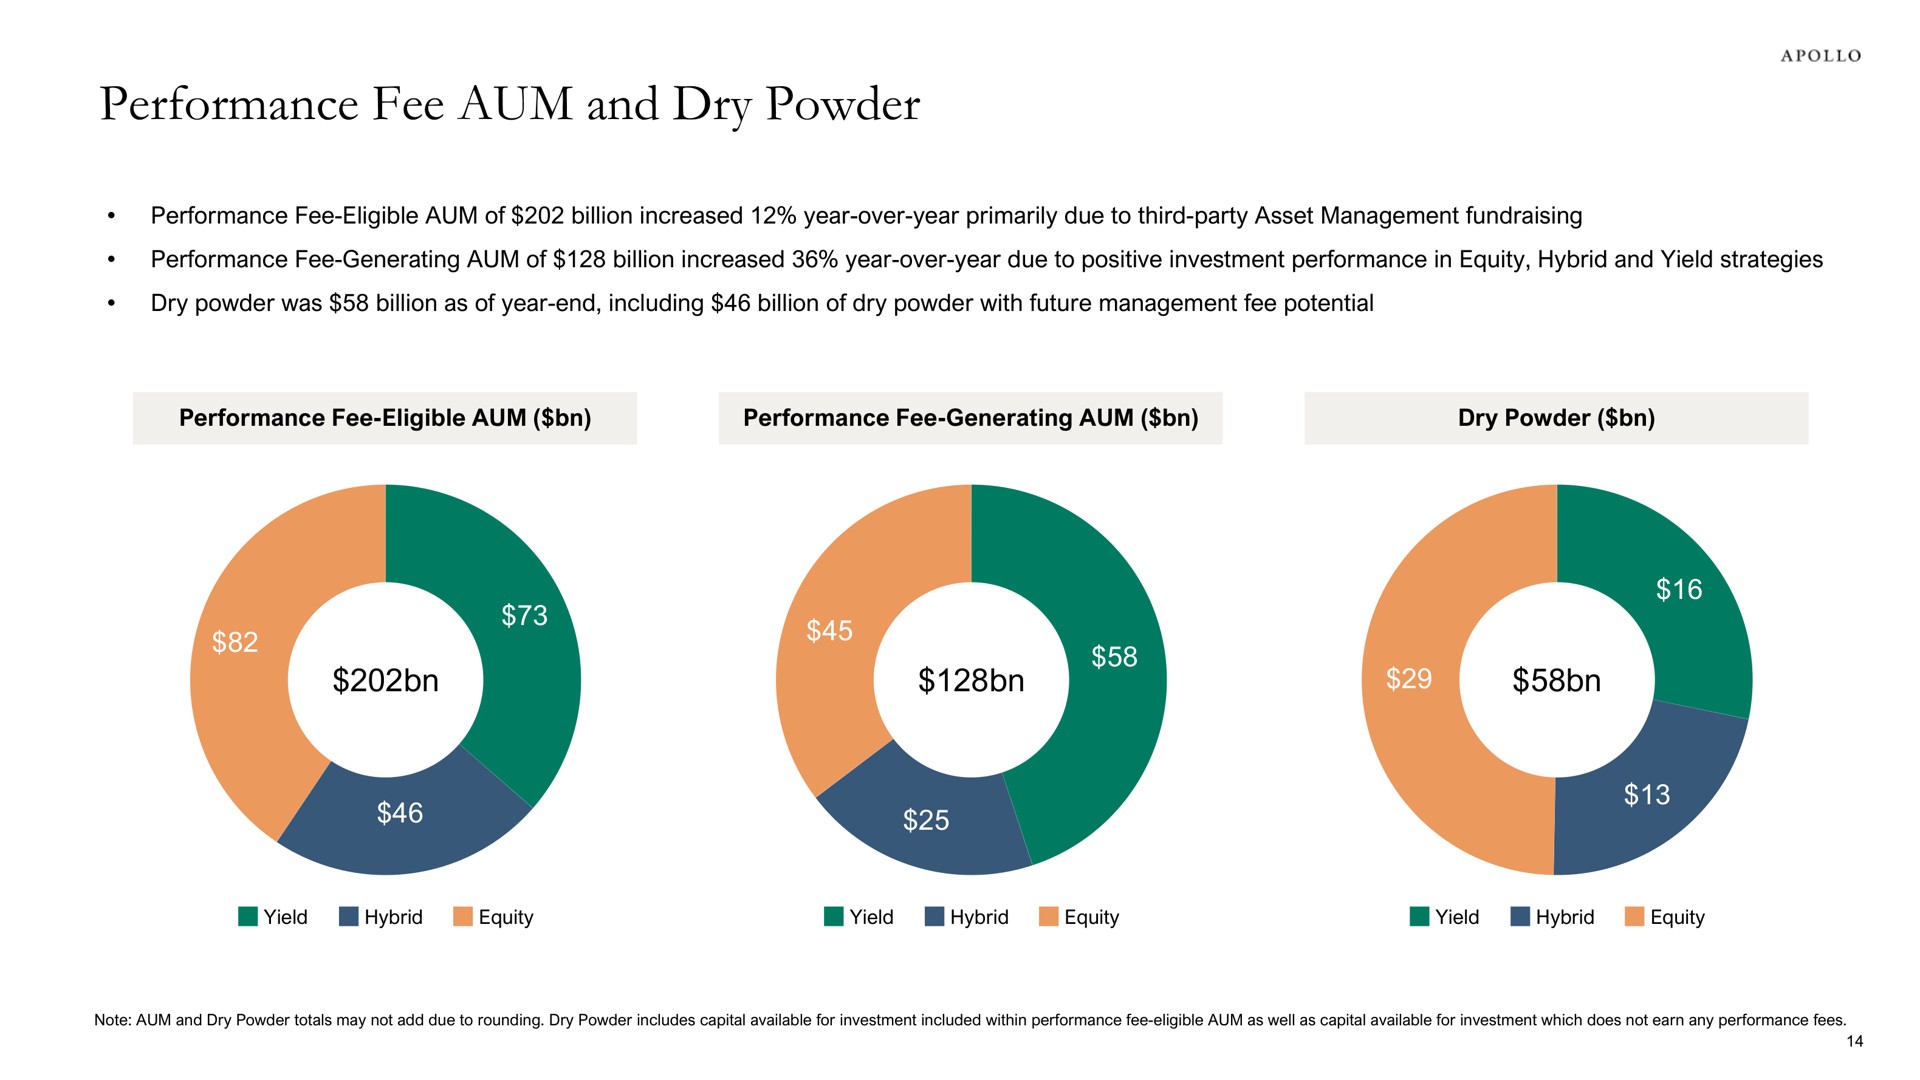 performance fee aum and dry powder toy | Apollo Global Management